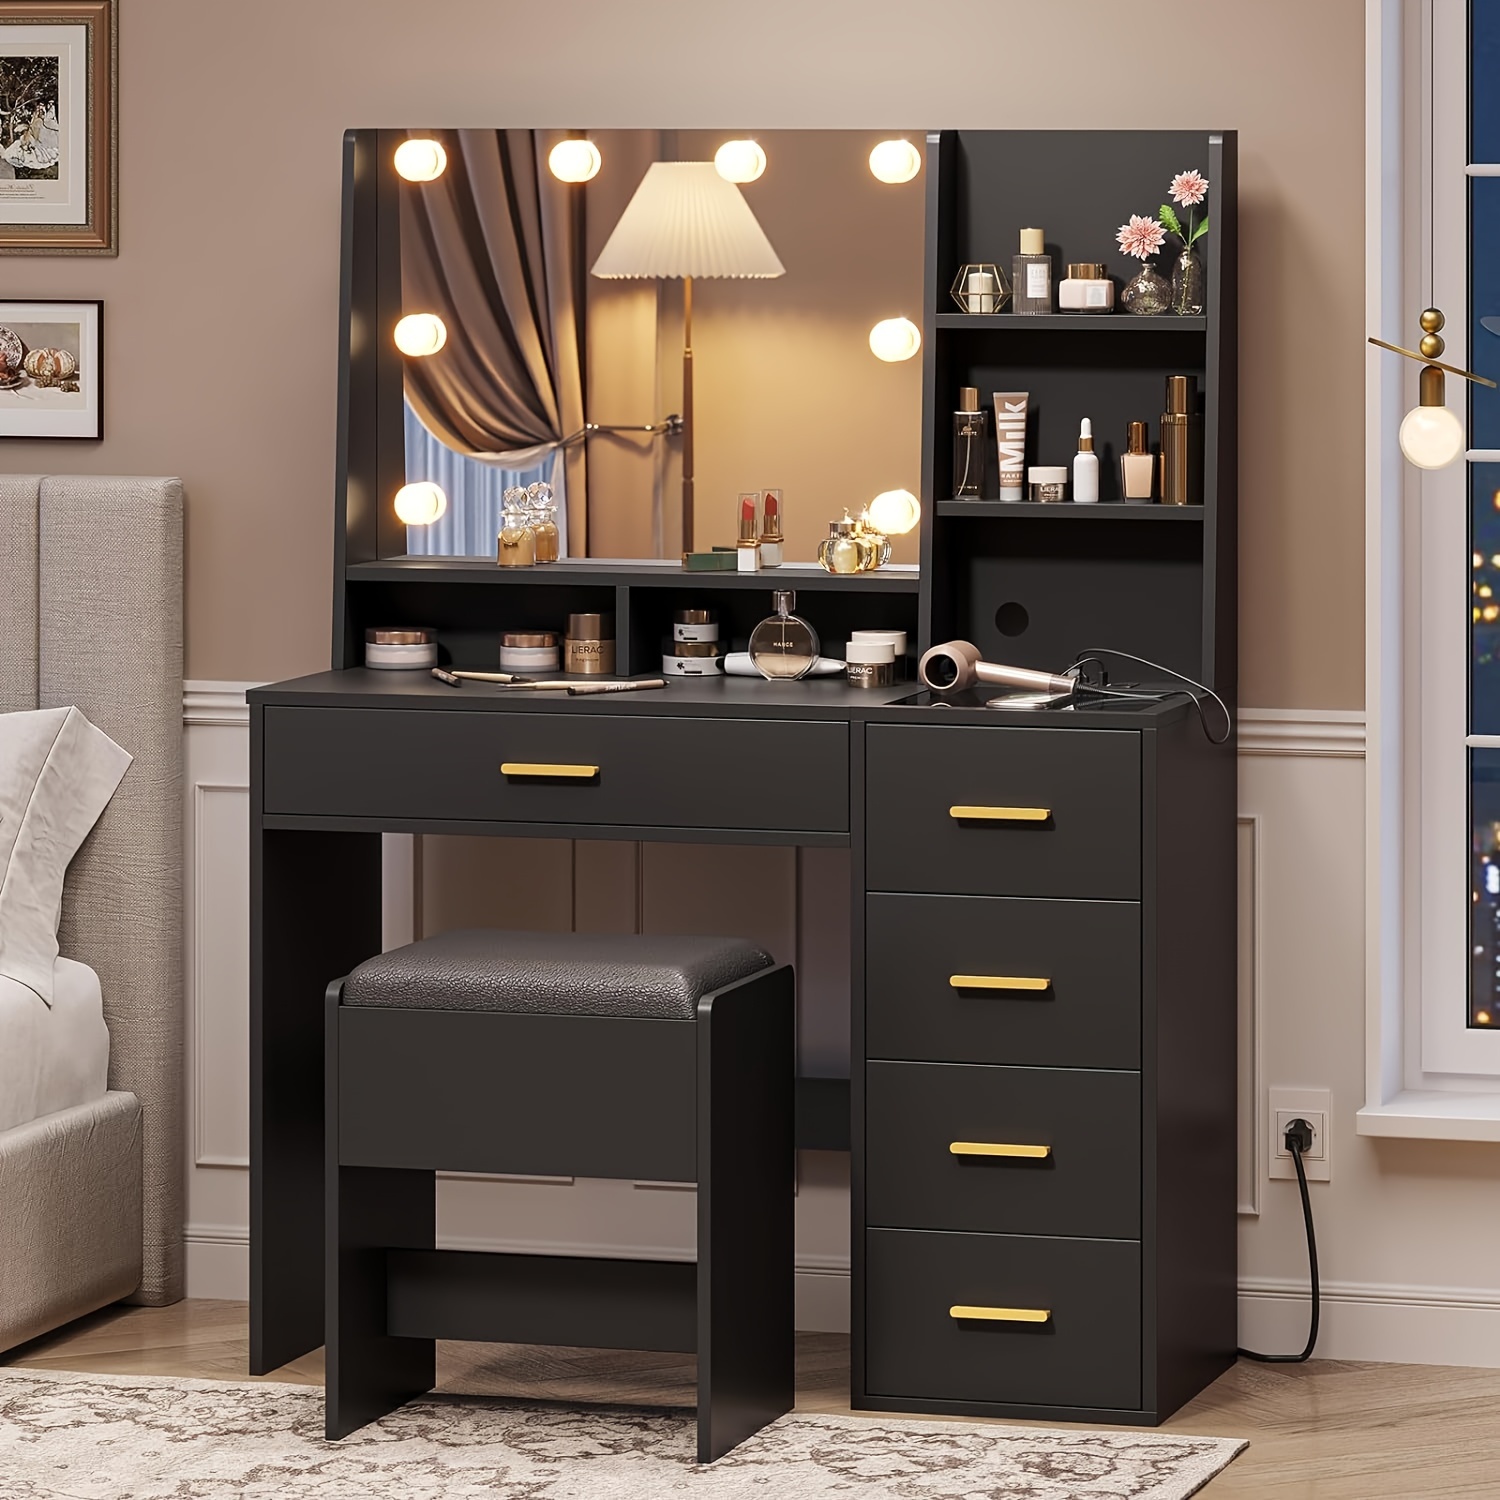 

Makeup Vanity Desk With Mirror&5 Drawers, Black Vanity Table With Charging Station And Chair And Storage Shelves For Women Girls